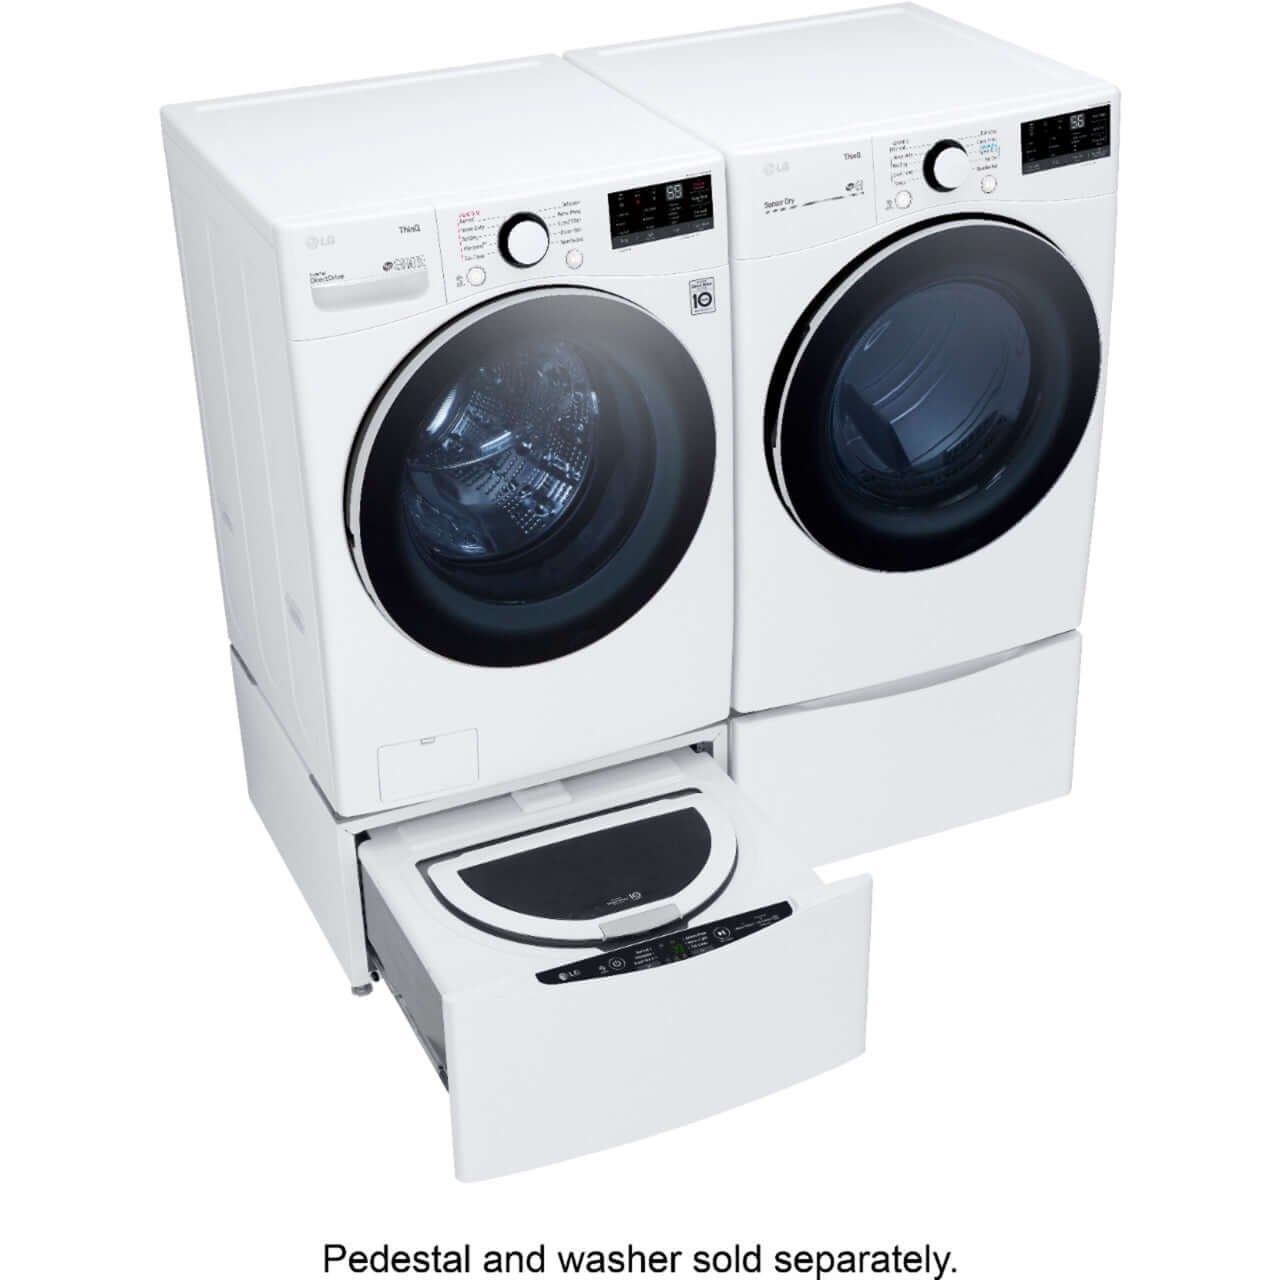 LG 27 In. 7.4-Cu. Ft. Front Load Gas Dryer with Built-In Intelligence in White (DLG3601W)